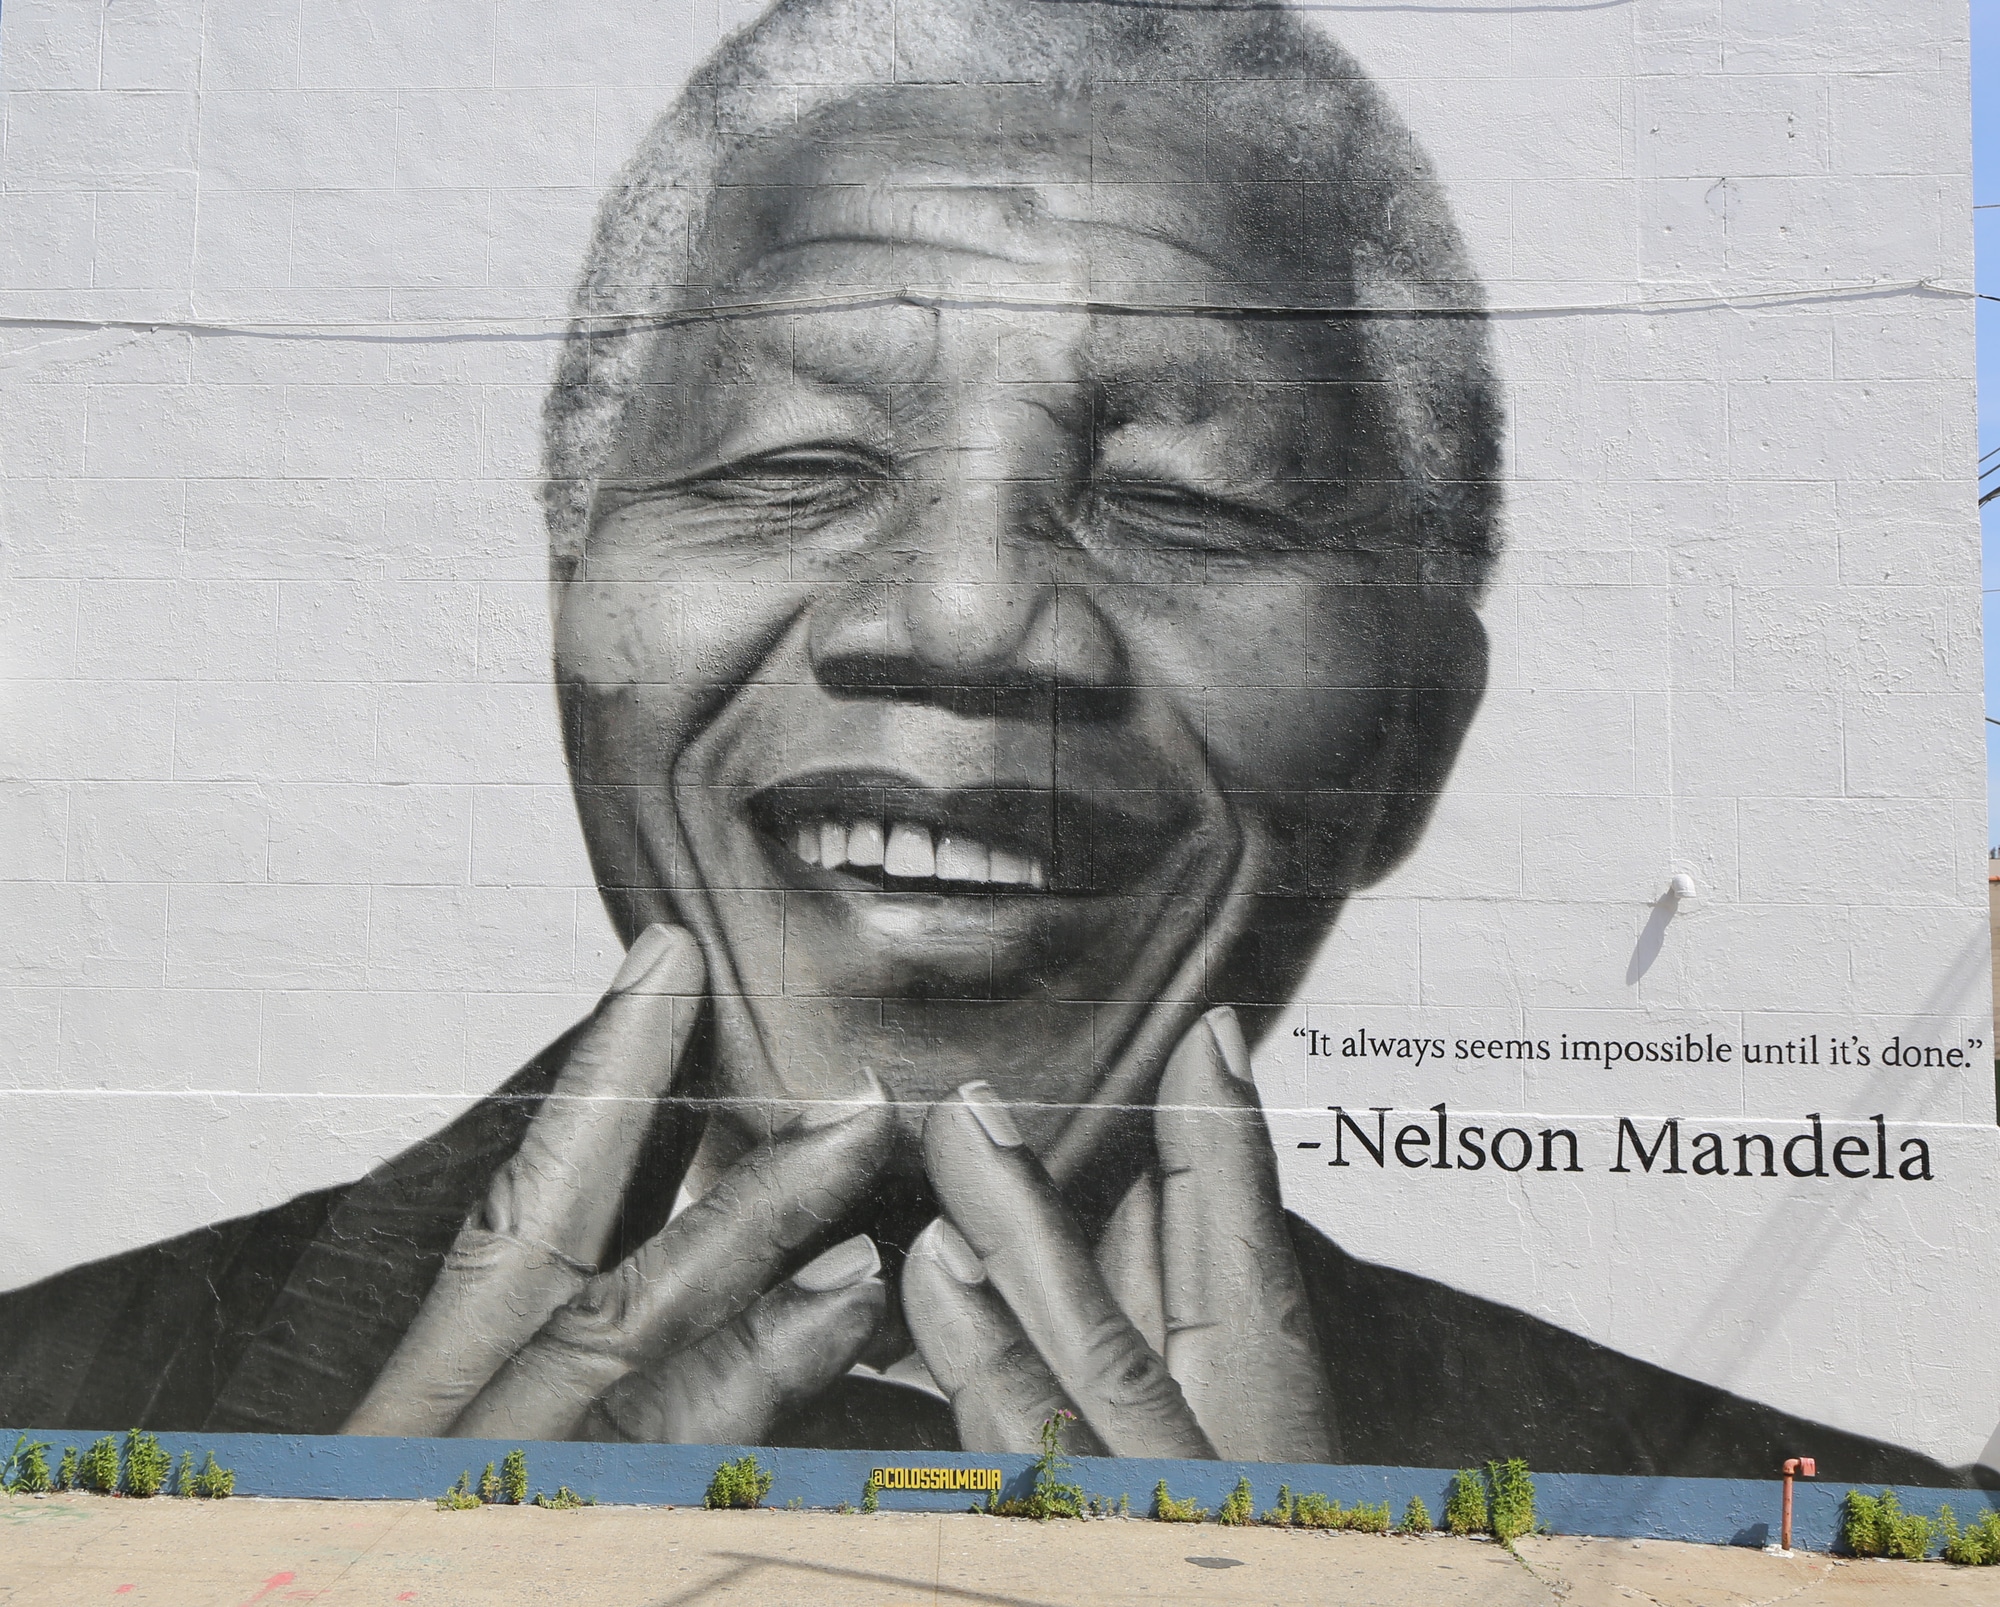 Biography of Nelson Mandela - a picture of Nelson Mandela